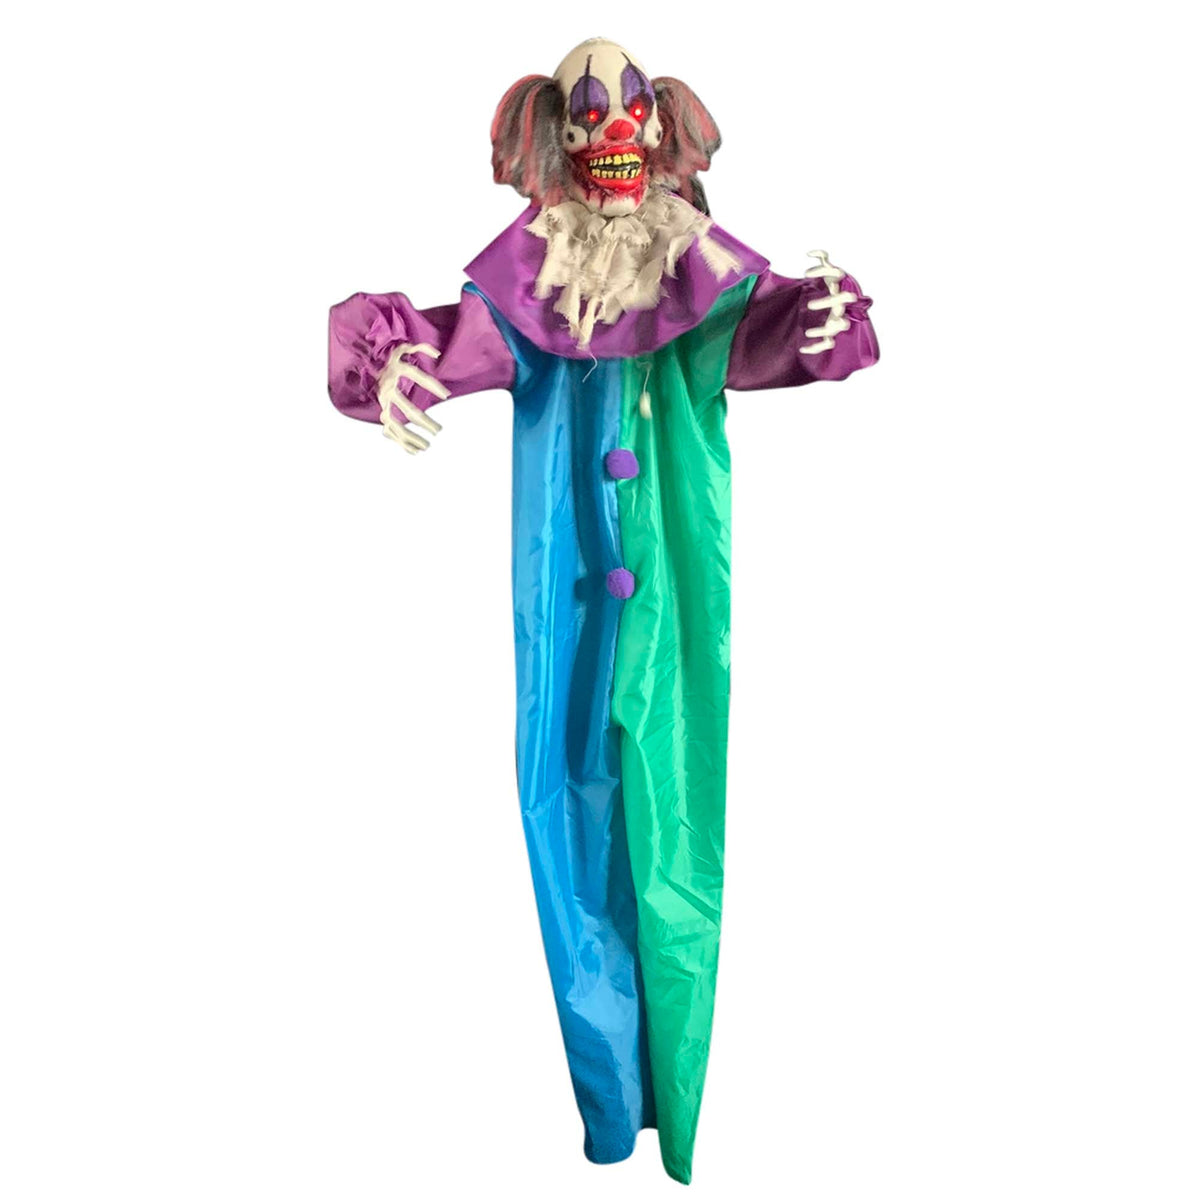 SUNSTAR INDUSTRIES Halloween Hanging Animated Clown, 72 Inches, 1 Count